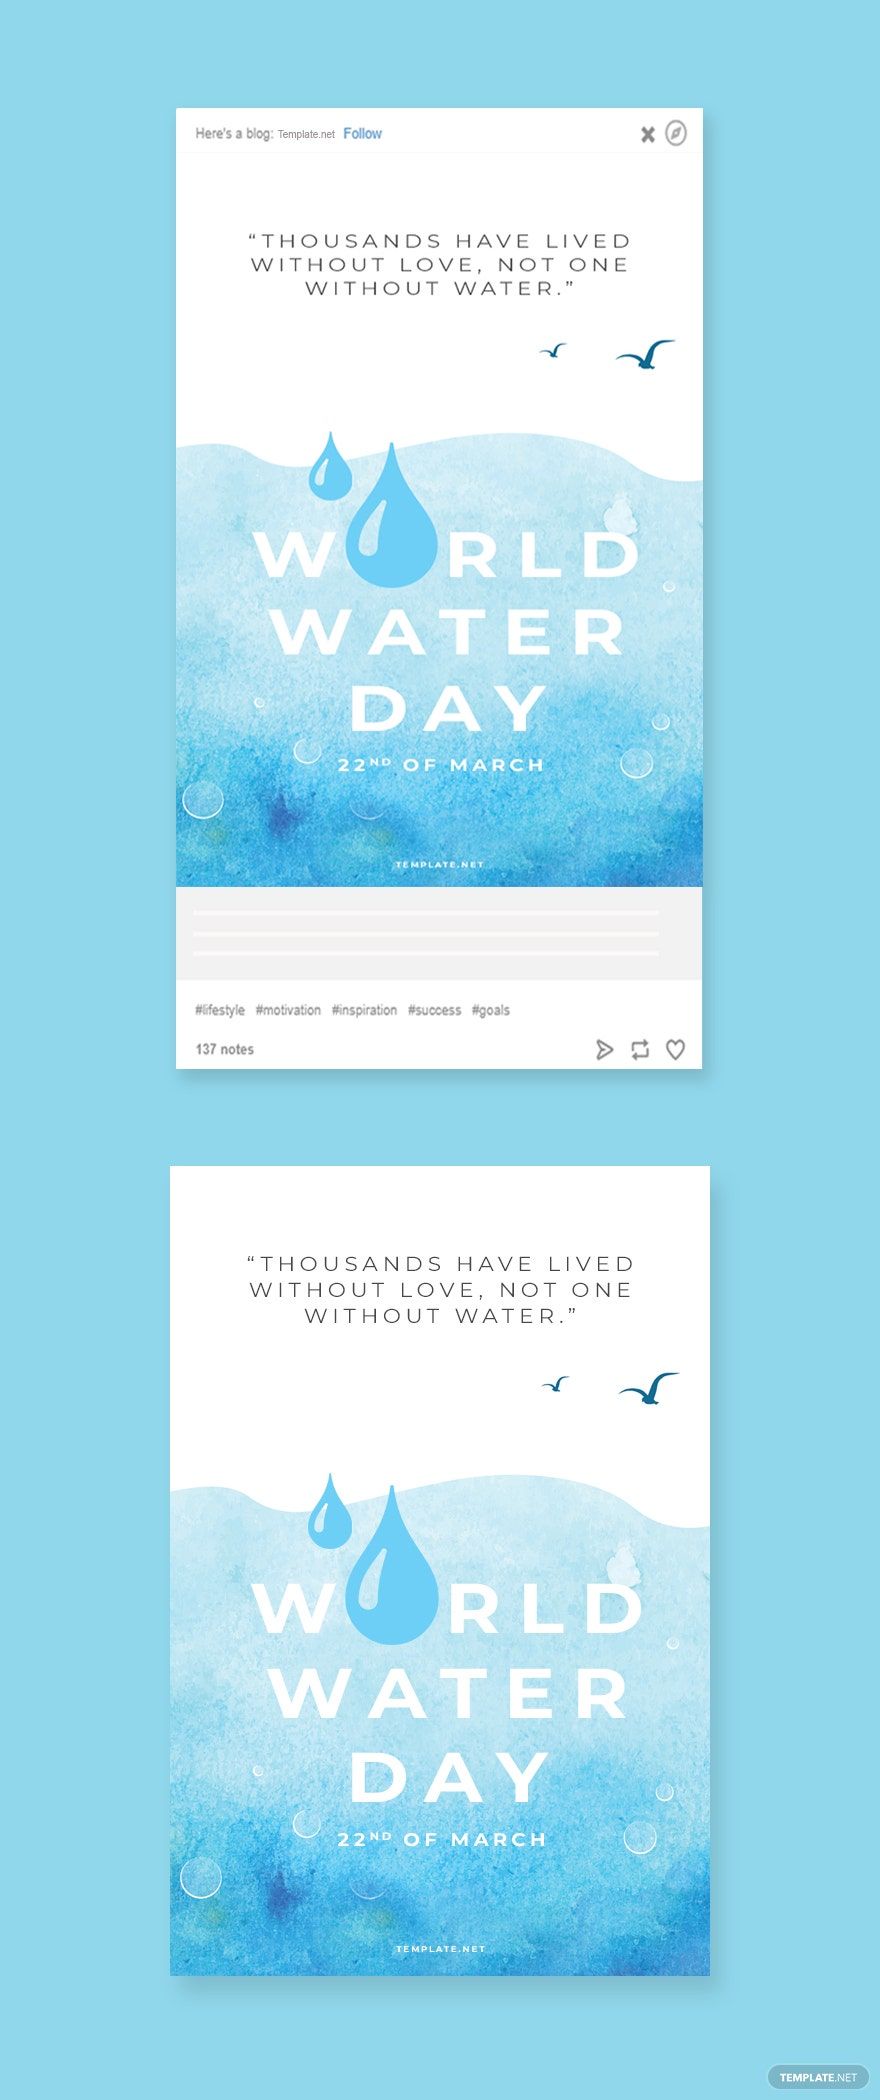 World Water Day Tumblr Post Template